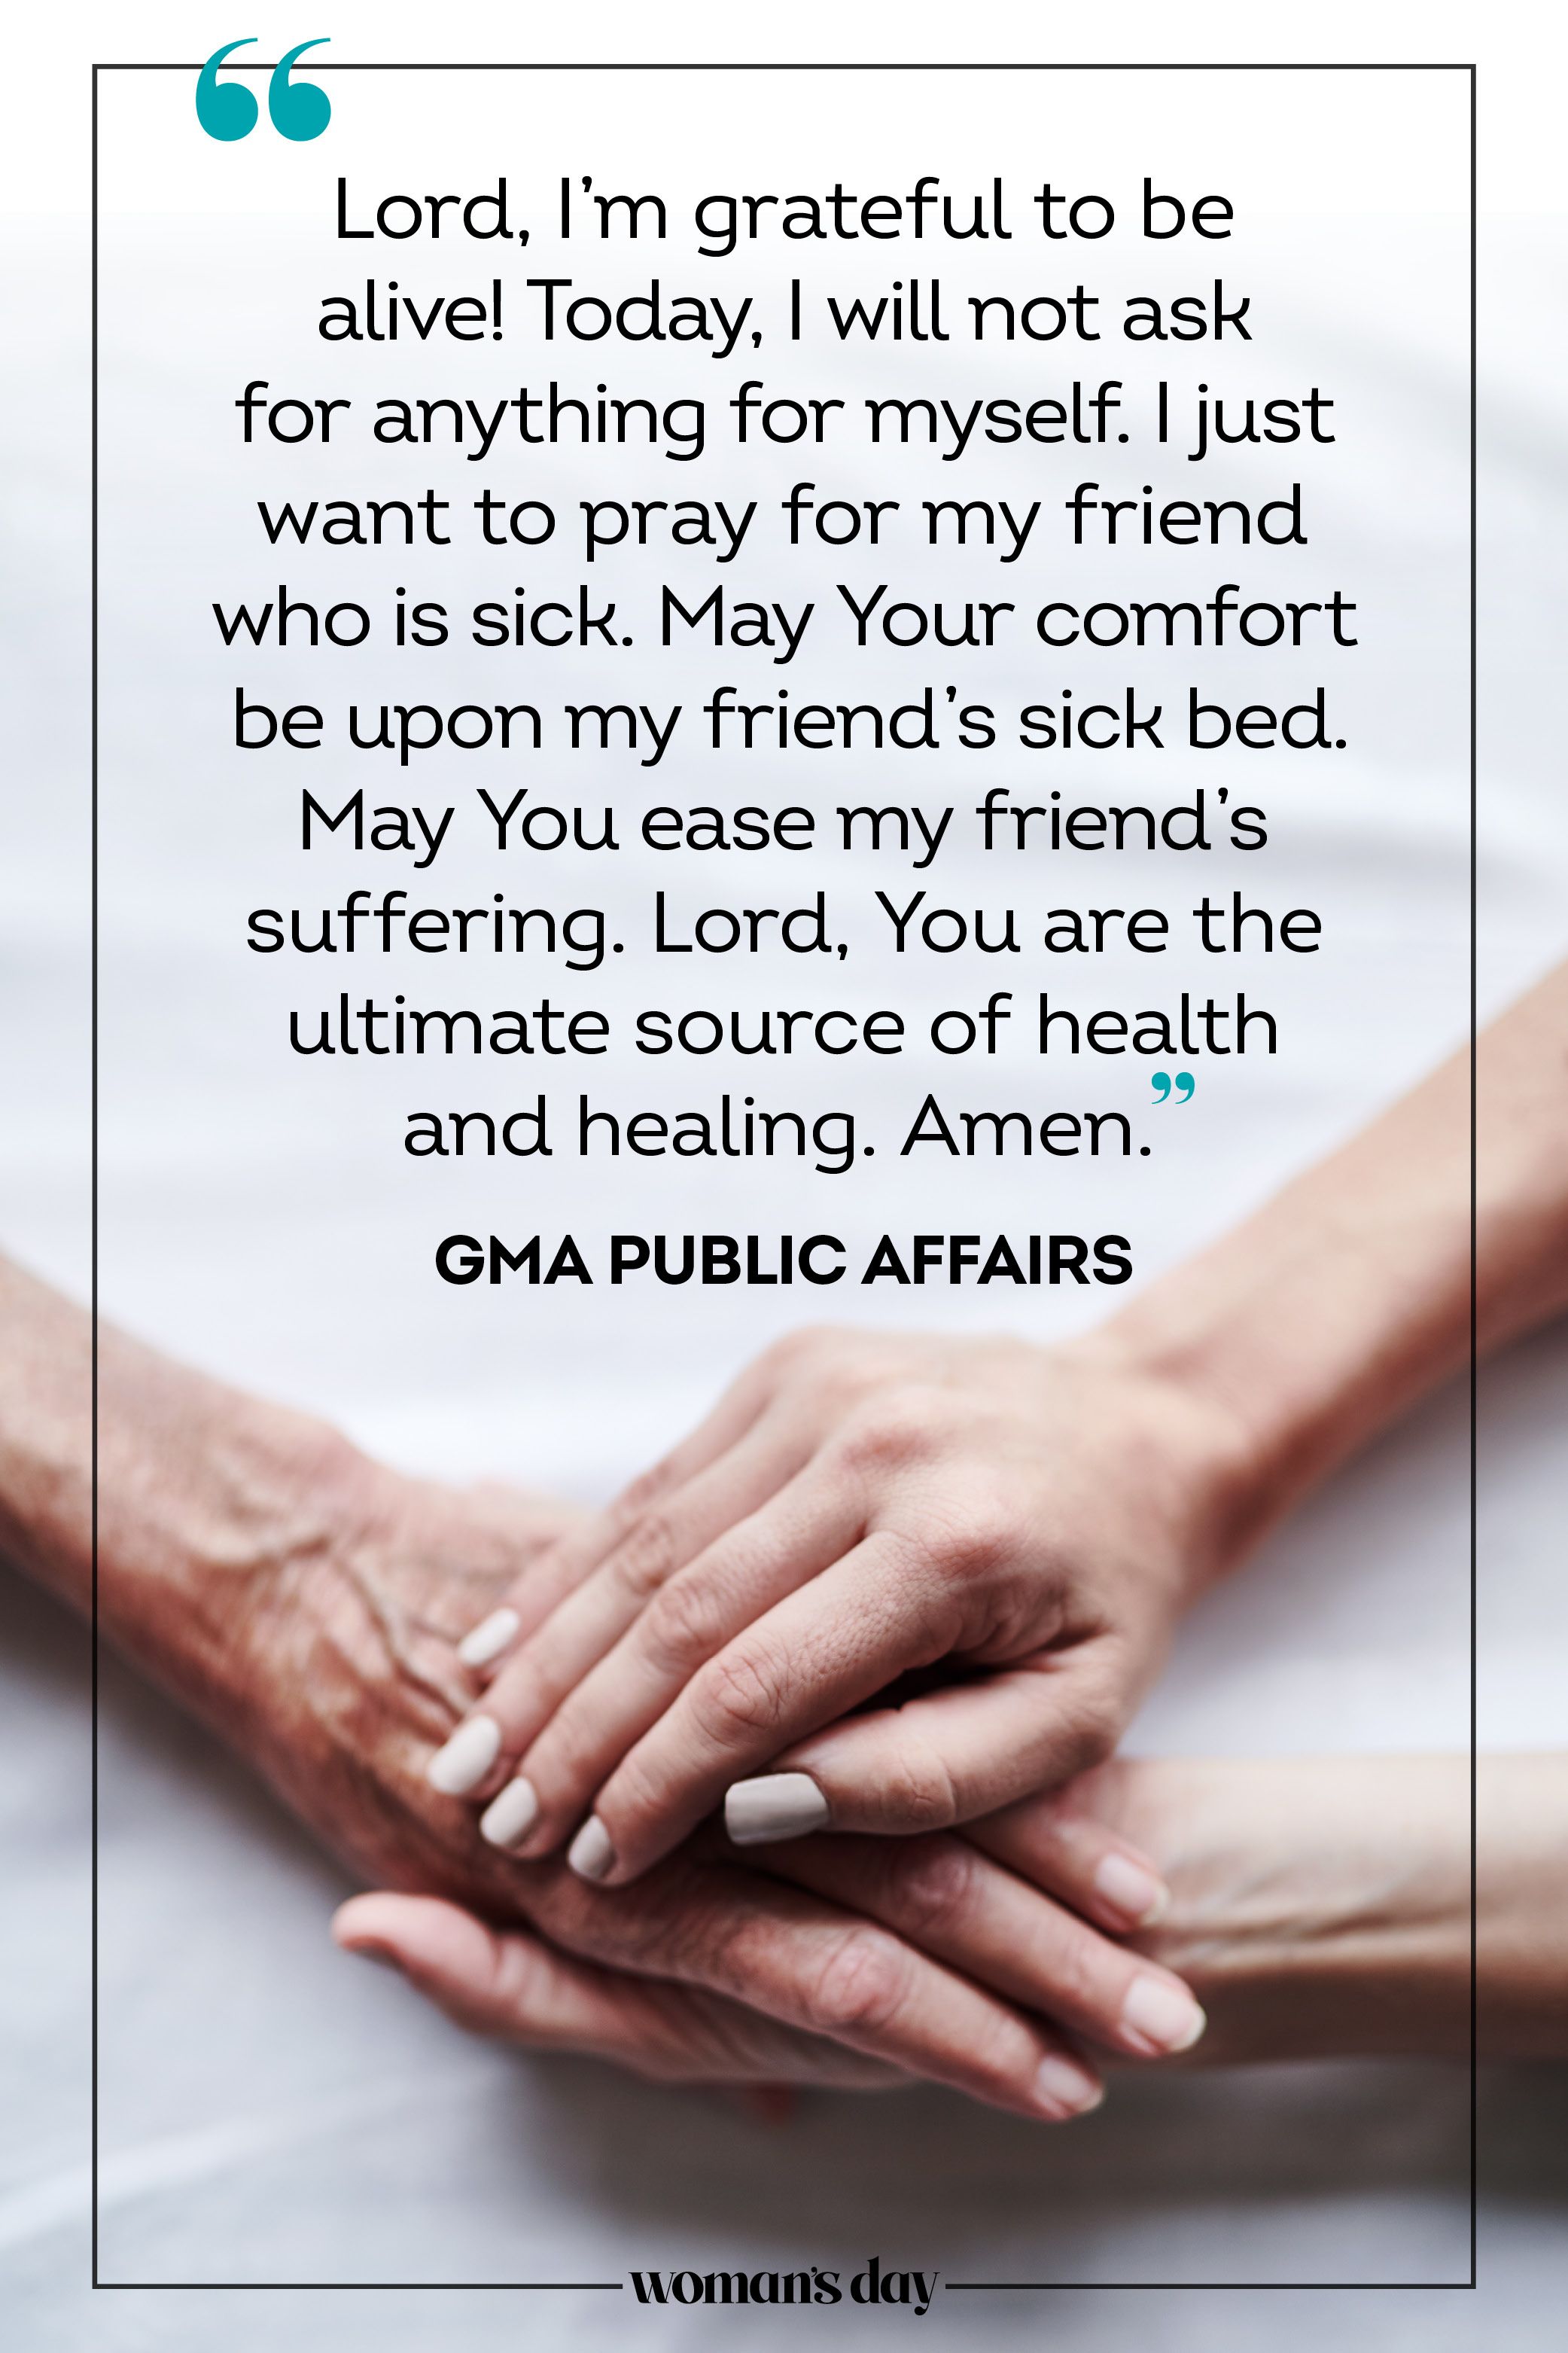 prayer for a friend in need